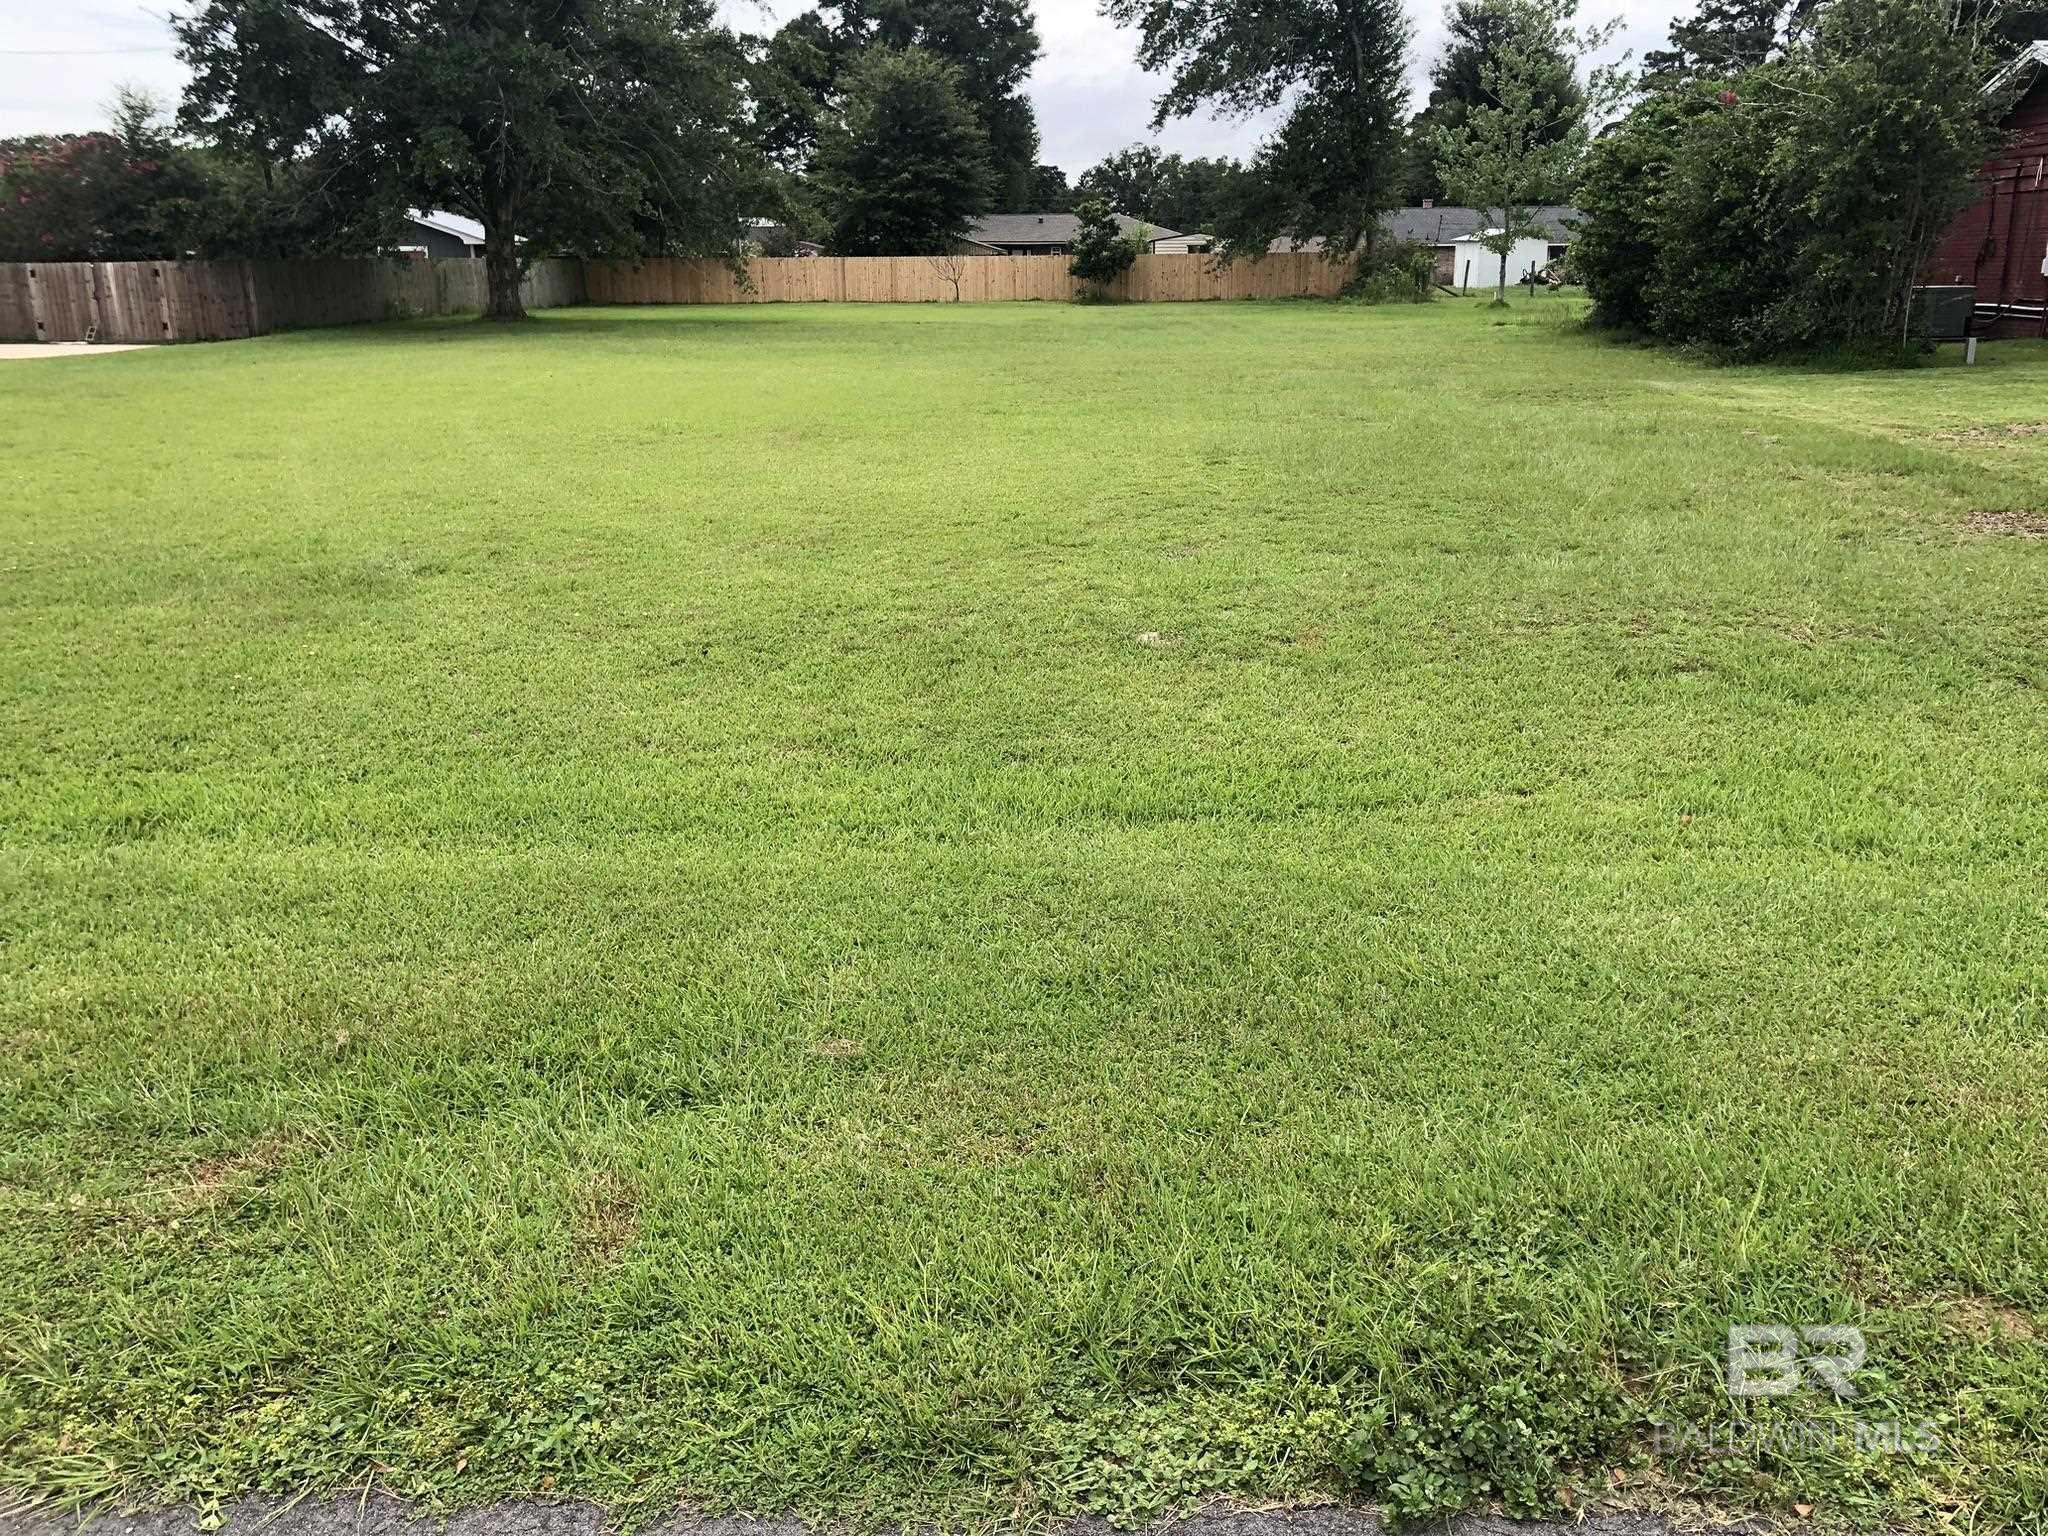 Boat lovers!!! This vacant lot in the Riverwood Subdivision nestled in Bon Secour is a great location to build your dream home. The lot is a nice level lot giving you the the best of both words, you can build on a high and dry with having access to your  deeded boat lot on Boggy Branch. Boggy Branch is a deep water creek that flows into the Bon Secour river with unobstructed access to Mobile bay and beyond.  The Riverwood Subdivision is made up of larger lots all roughly 100 X 200.  It is located off of county Road 10 on the South Side of Foley, making it convenient to the beaches and dining in Gulf Shores.  It is also convenient to shopping and dining in Foley, Fairhope and other delightful communities around Southern Baldwin County.  The Blessing of this community is you are able to choose between going to dinner by car or by boat.  If by Boat you can catch the great sunsets over Mobile Bay on your way either to or from dinner.  Come live the boat life!! Call now for your appointment.